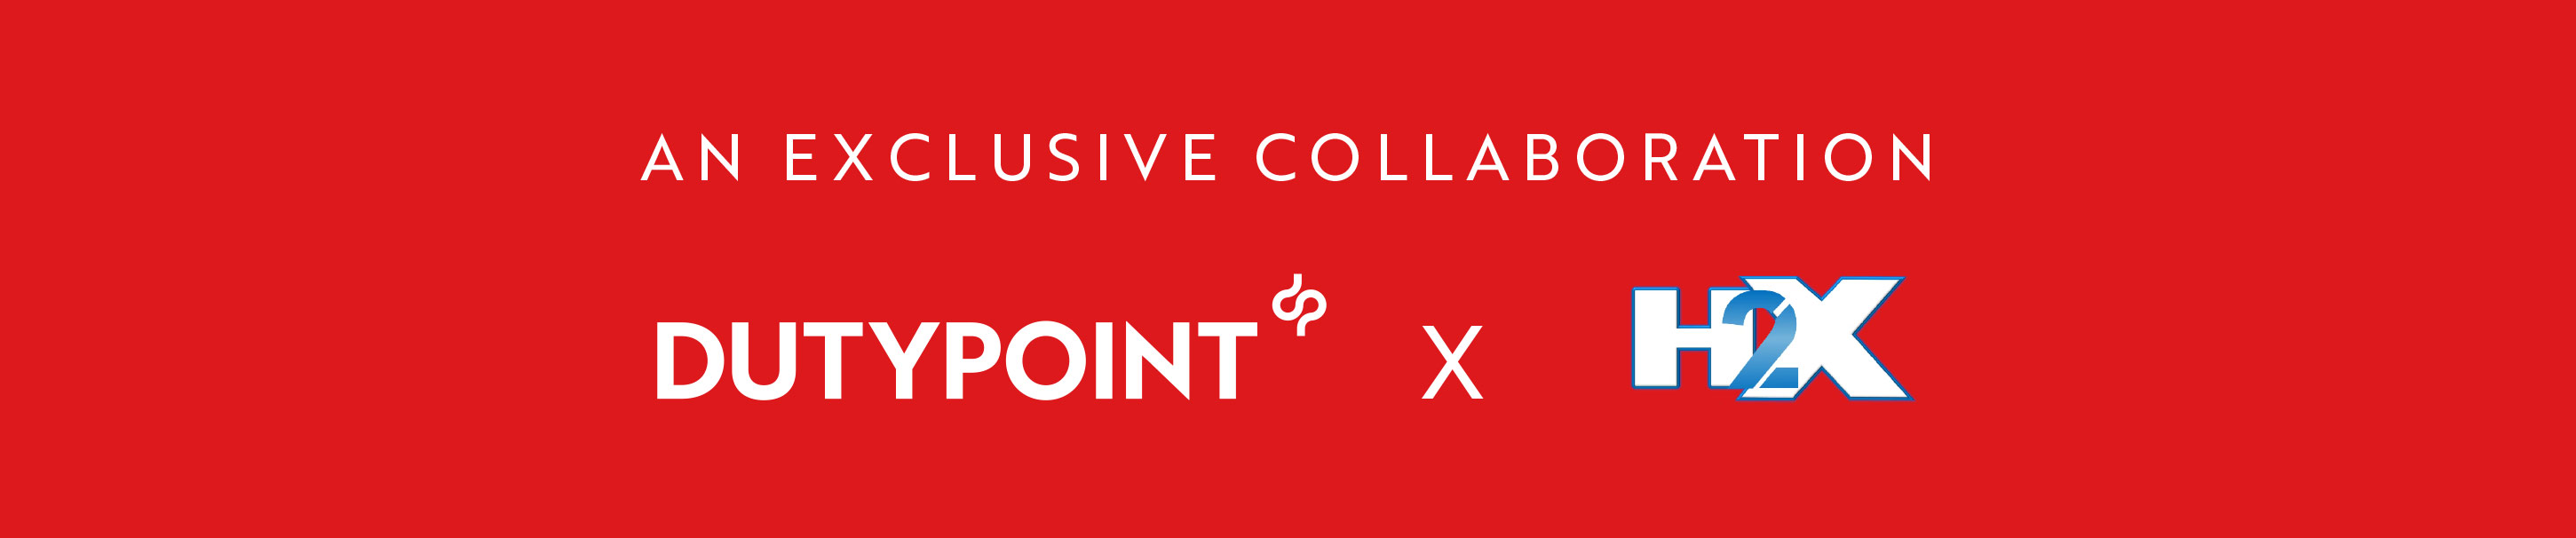 An-Exclusive-collaboration. Dutypoint x H2X